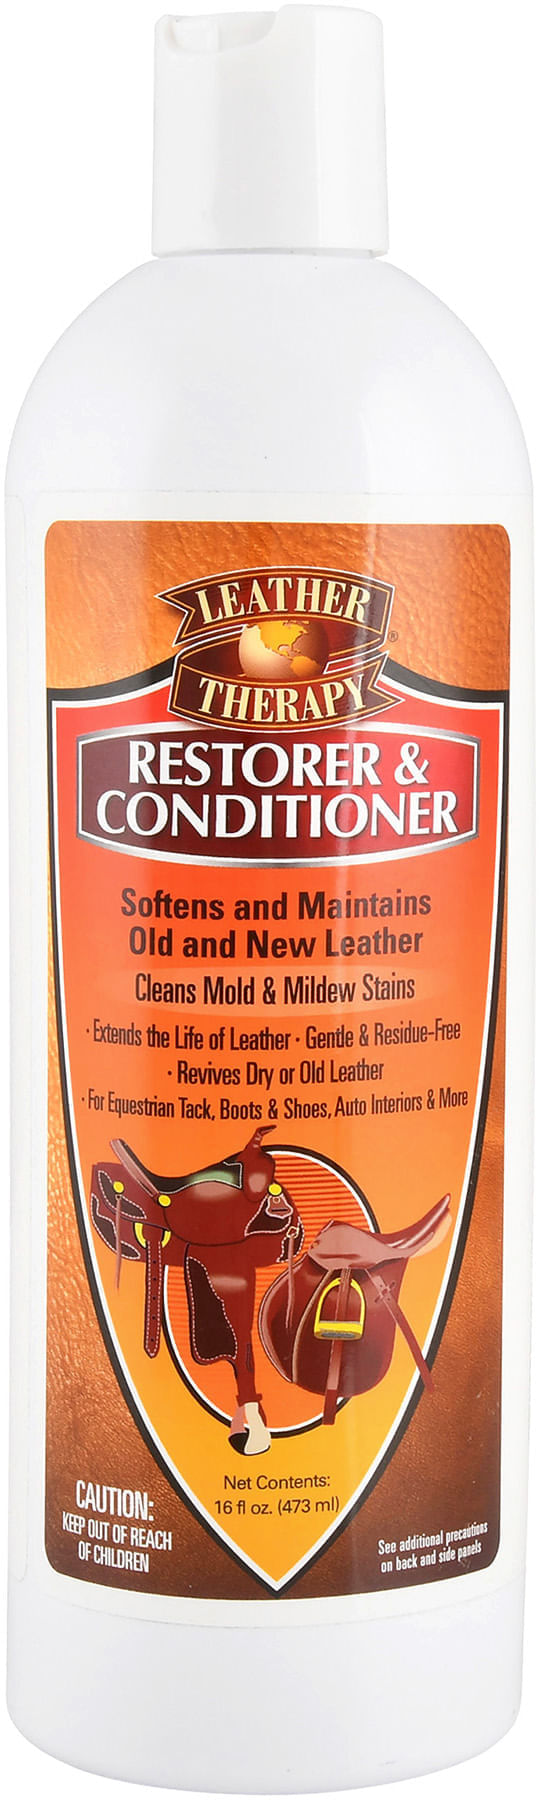 Leather-Therapy-Restorer---Conditioner-16-oz